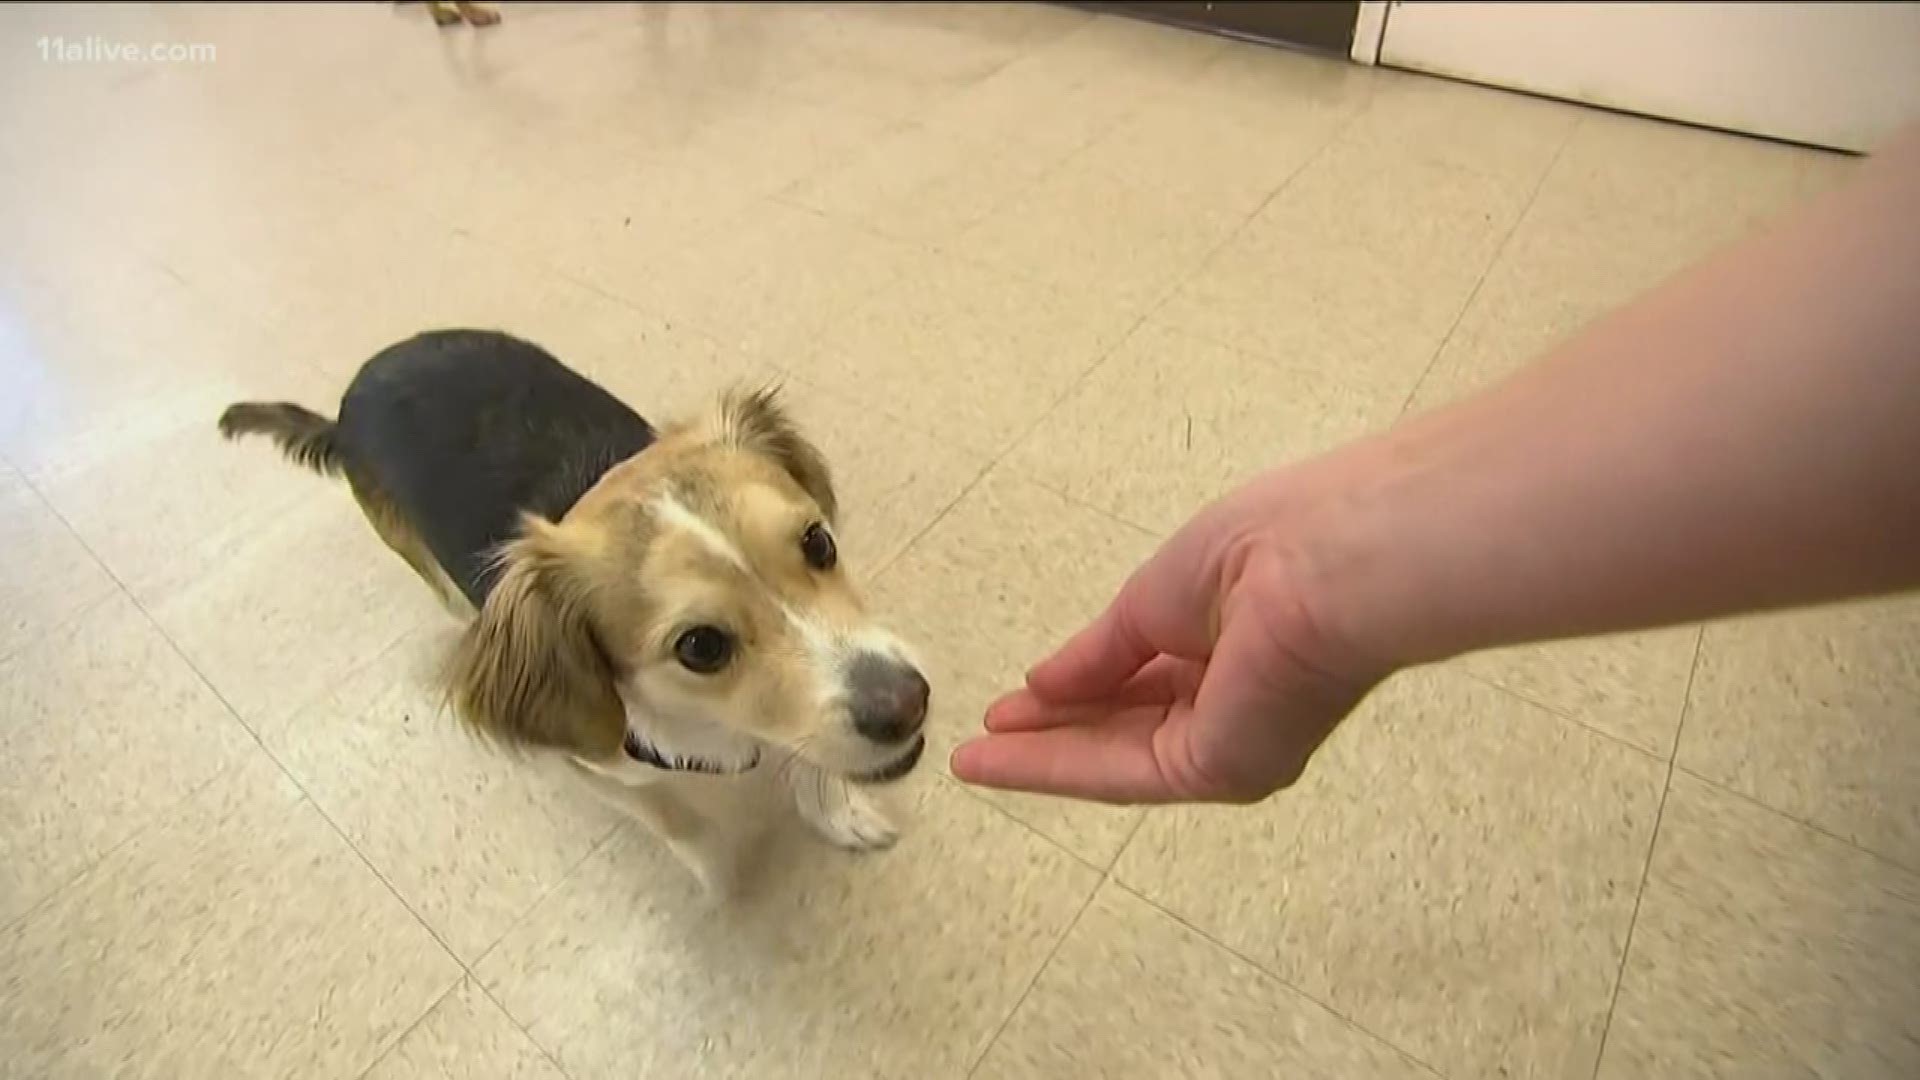 Some "grain free" dog foods could contribute to heart disease, the agency is warning.